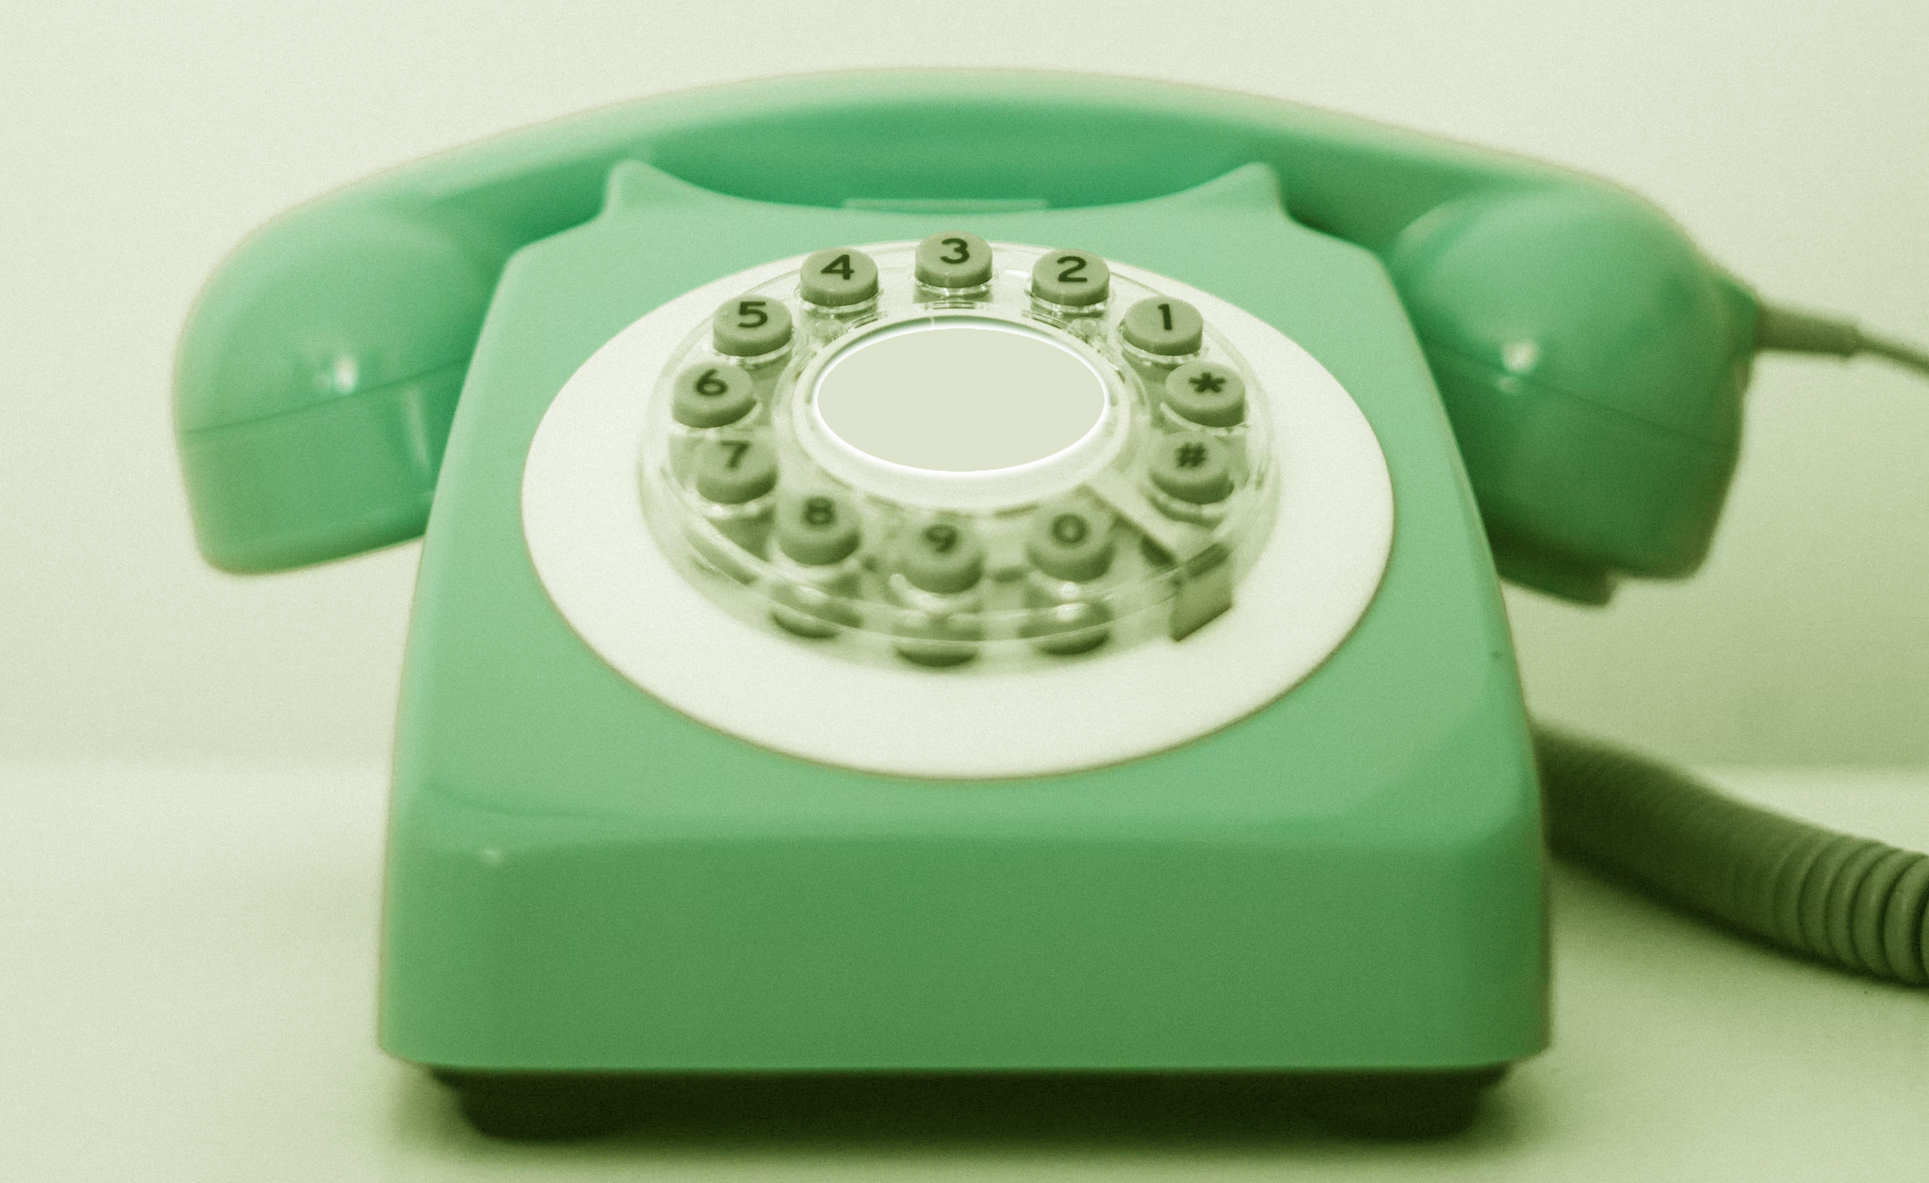 Green phone for the right calls 